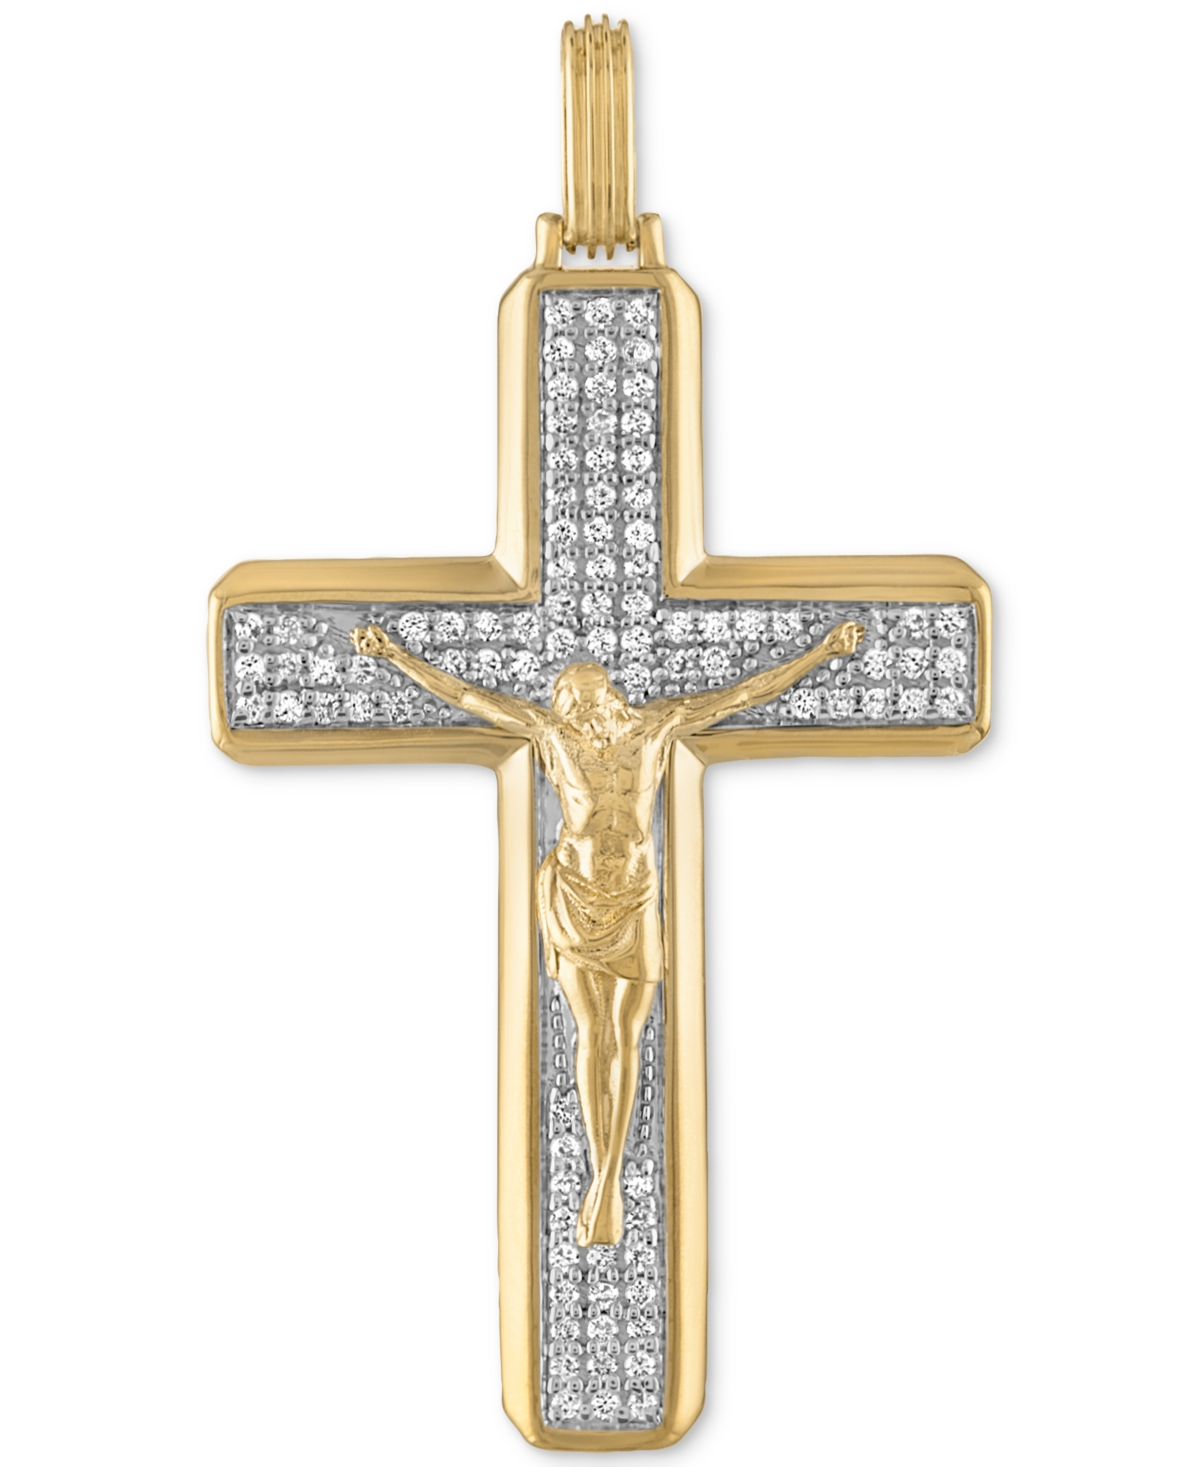 Esquire Men's Jewelry Cubic Zirconia Crucifix Cross Pendant In Sterling Silver & 14k Gold-plate, Created For Macy's In Gold Over Silver